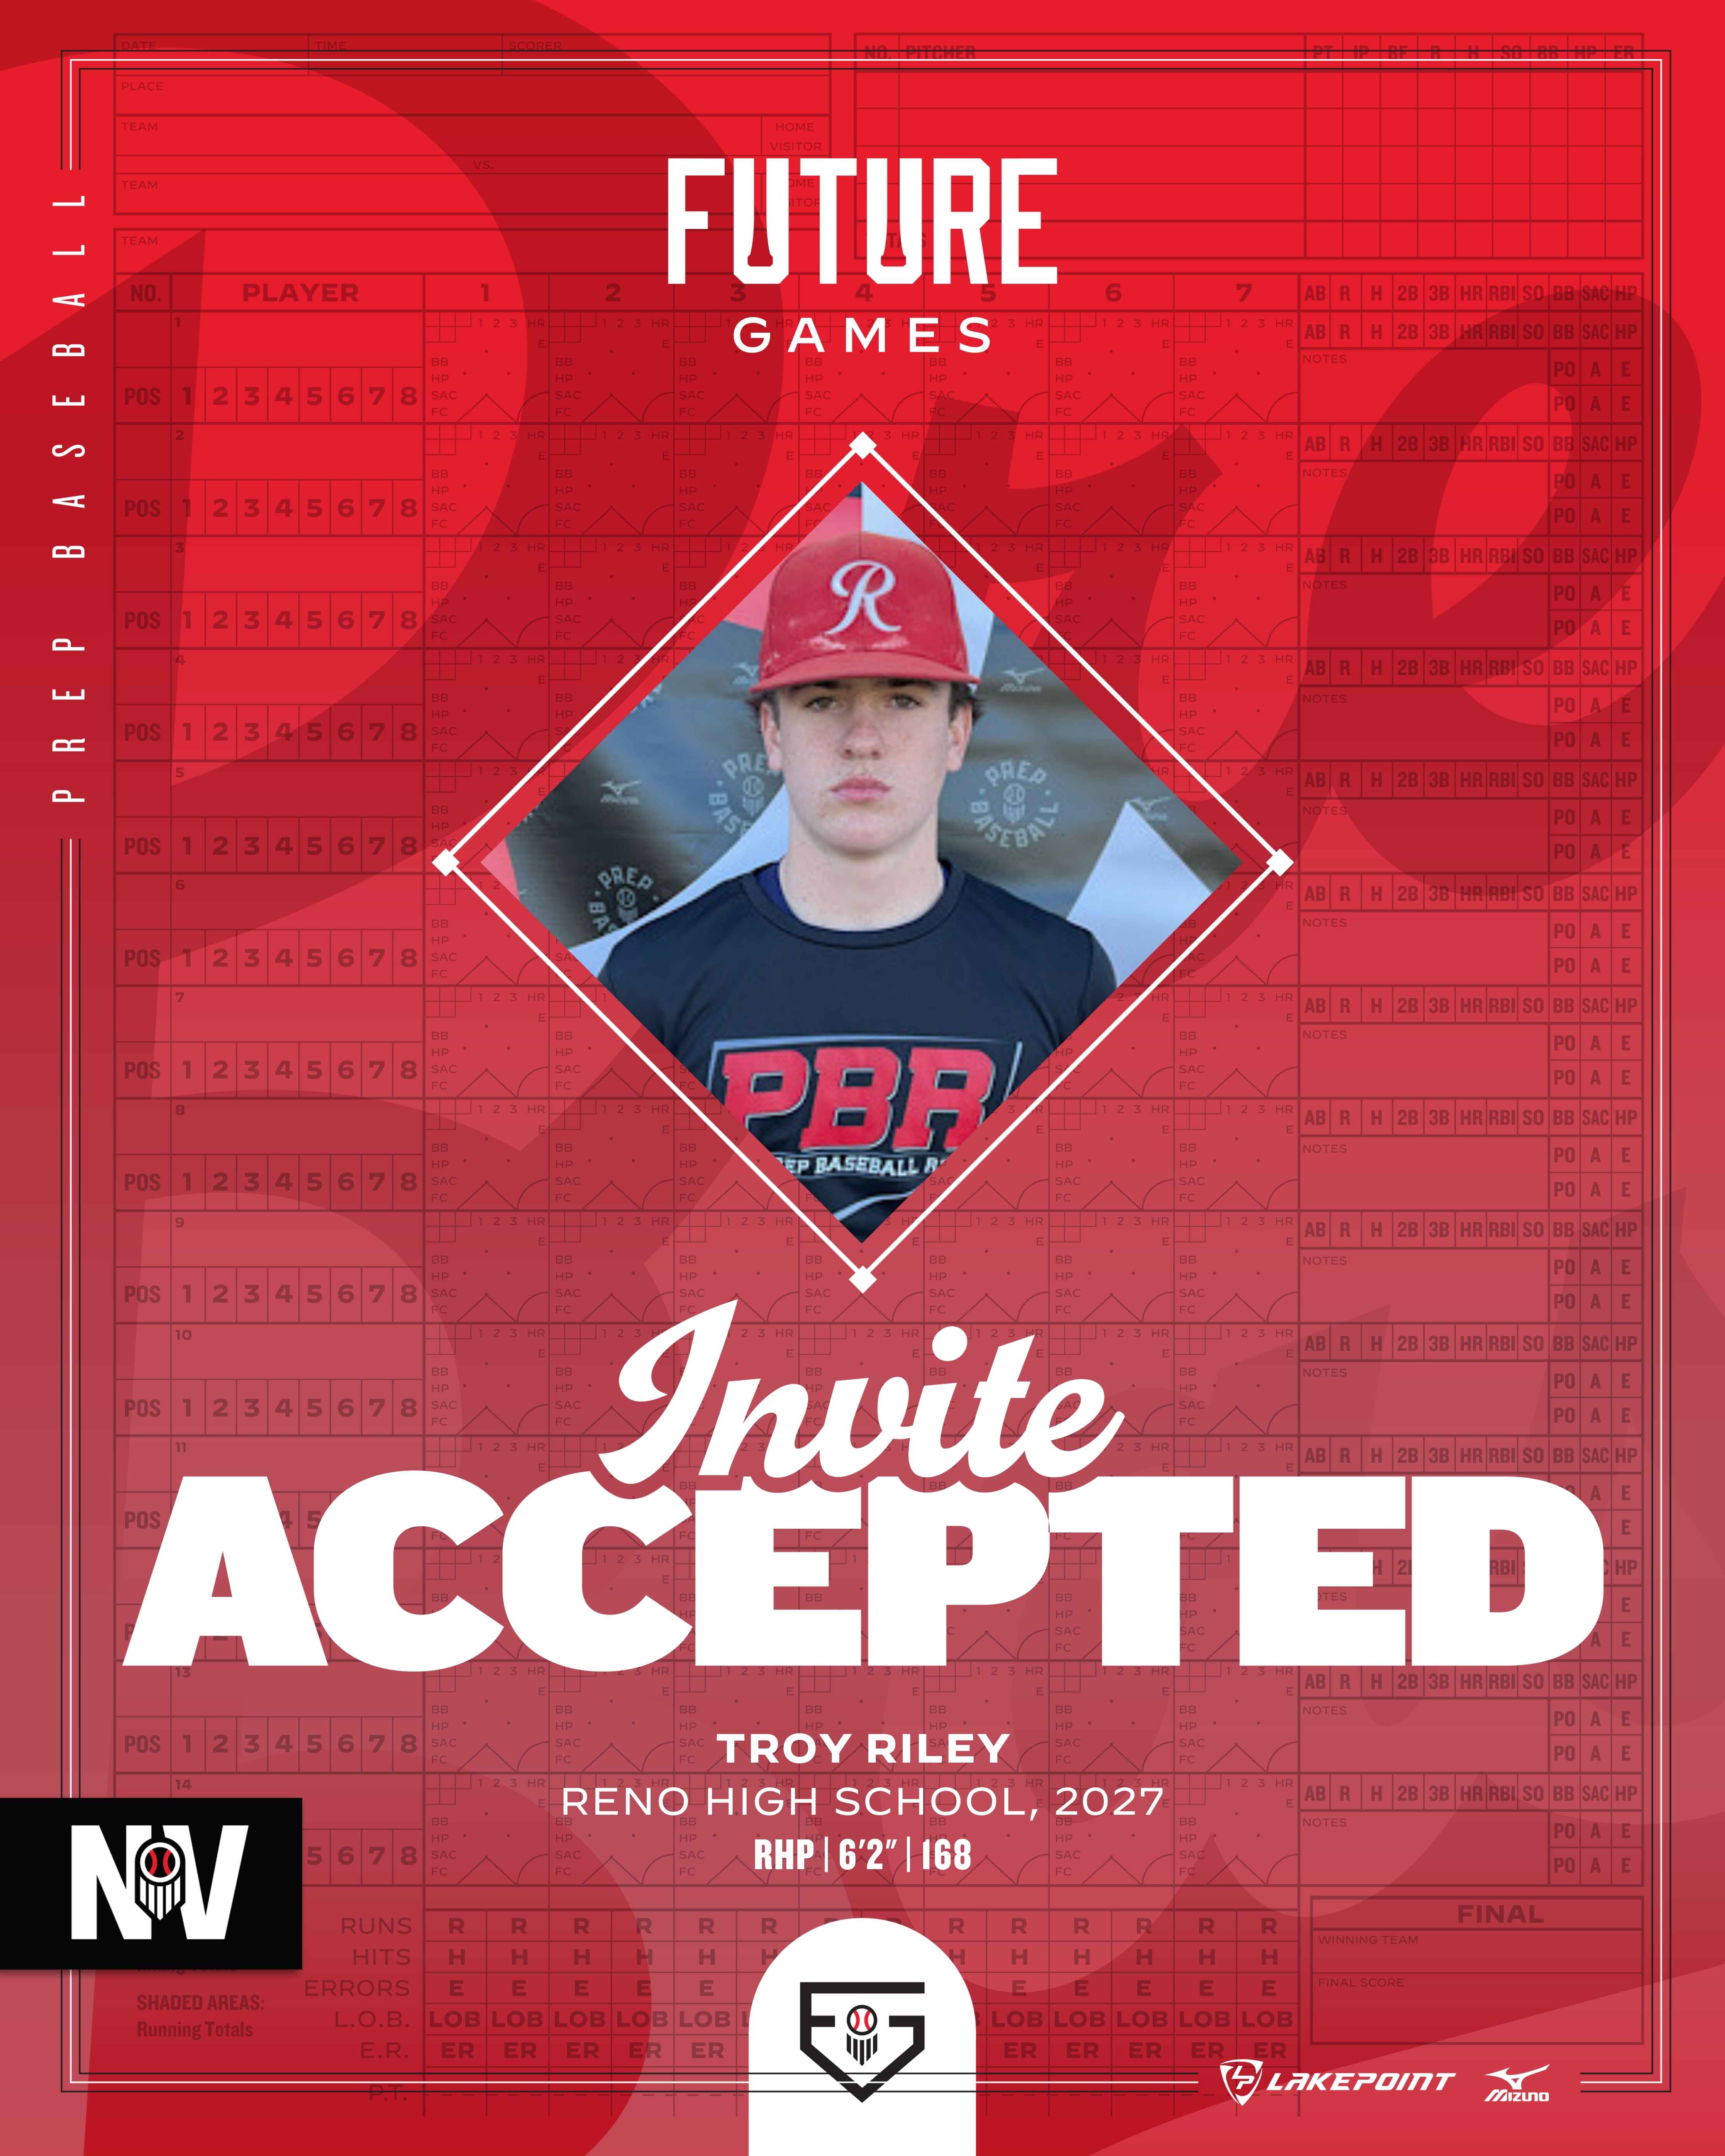 NV FUTURE GAMES OPTION 4 - 3 - TROY RILEY